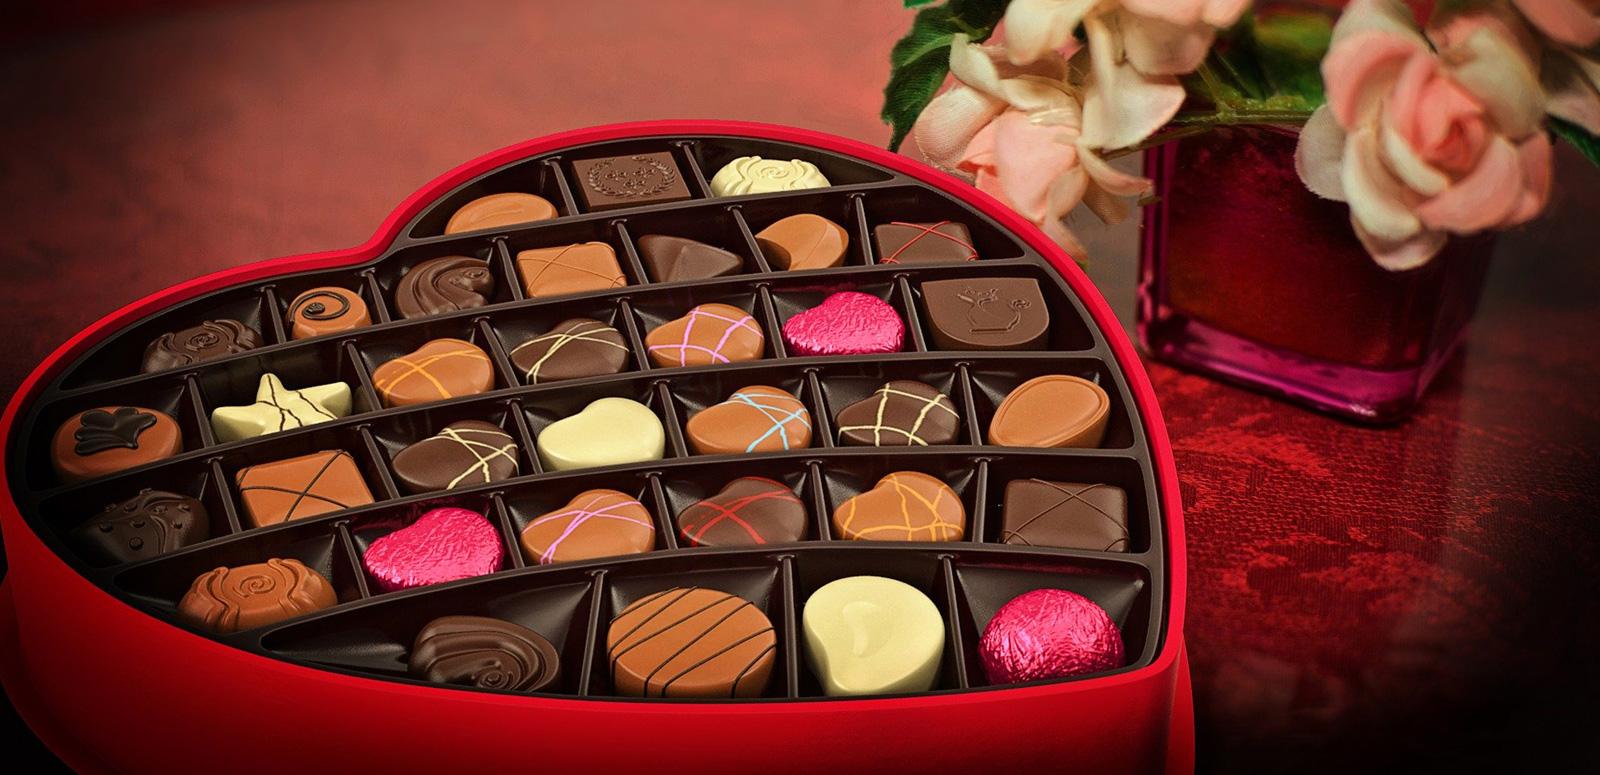 A heart shaped box of assorted chocolates with a small vase of pink roses in the background